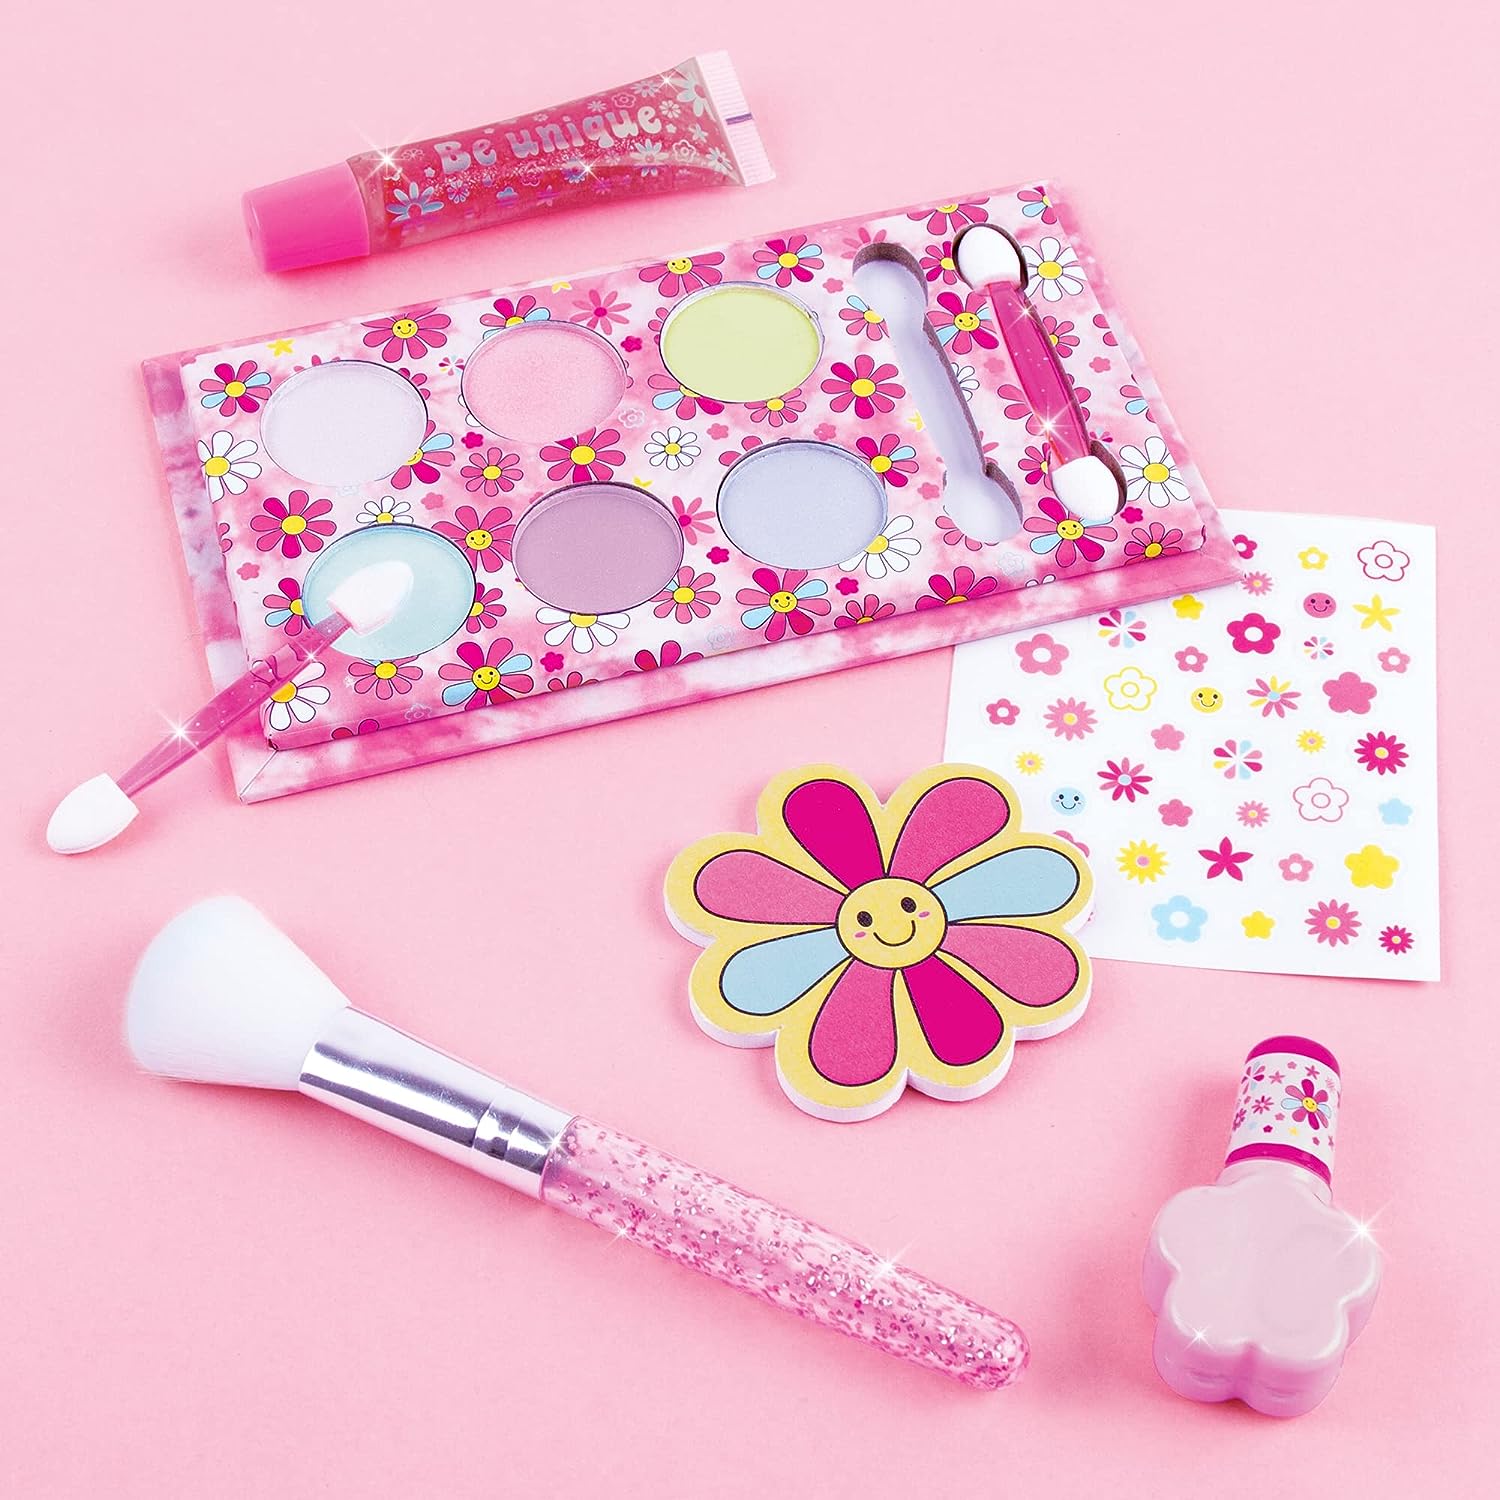 Make It Real Cosmetic Set, Love And Daisies